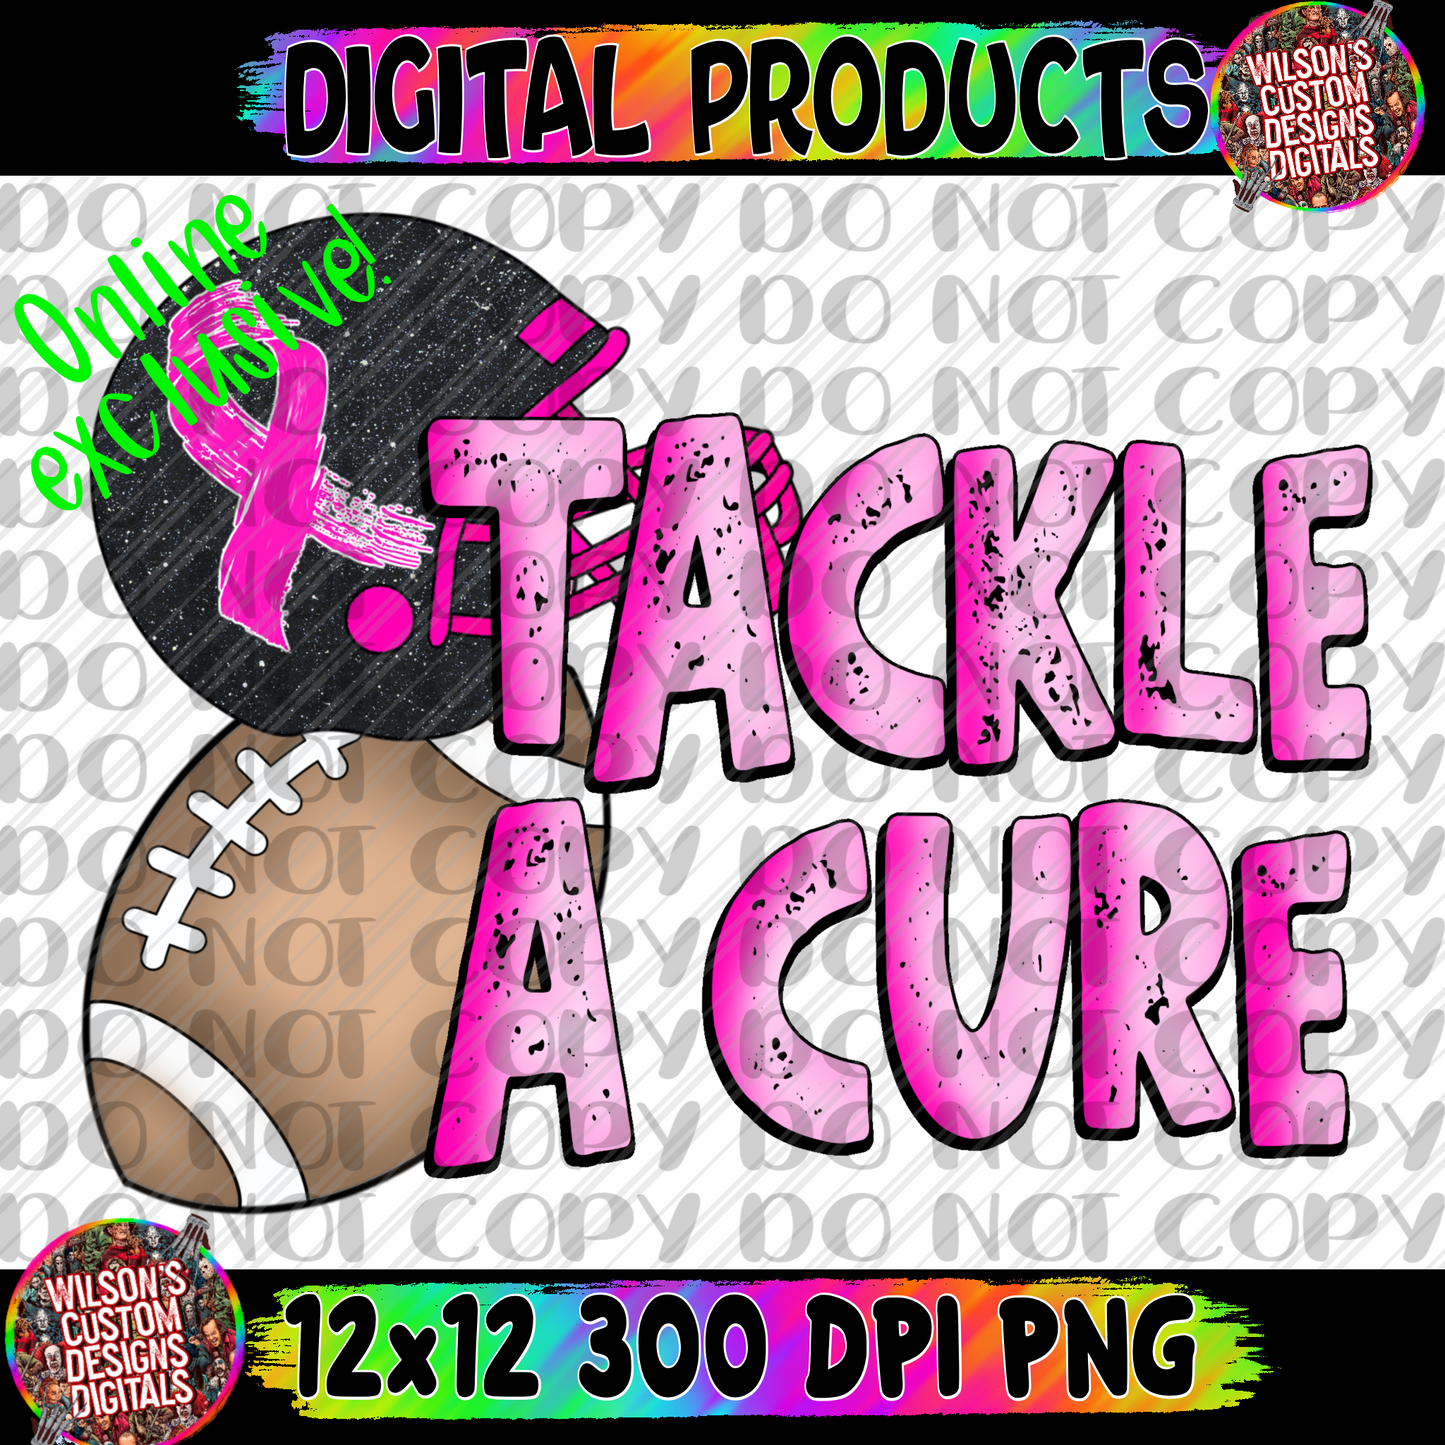 Tackle a cure